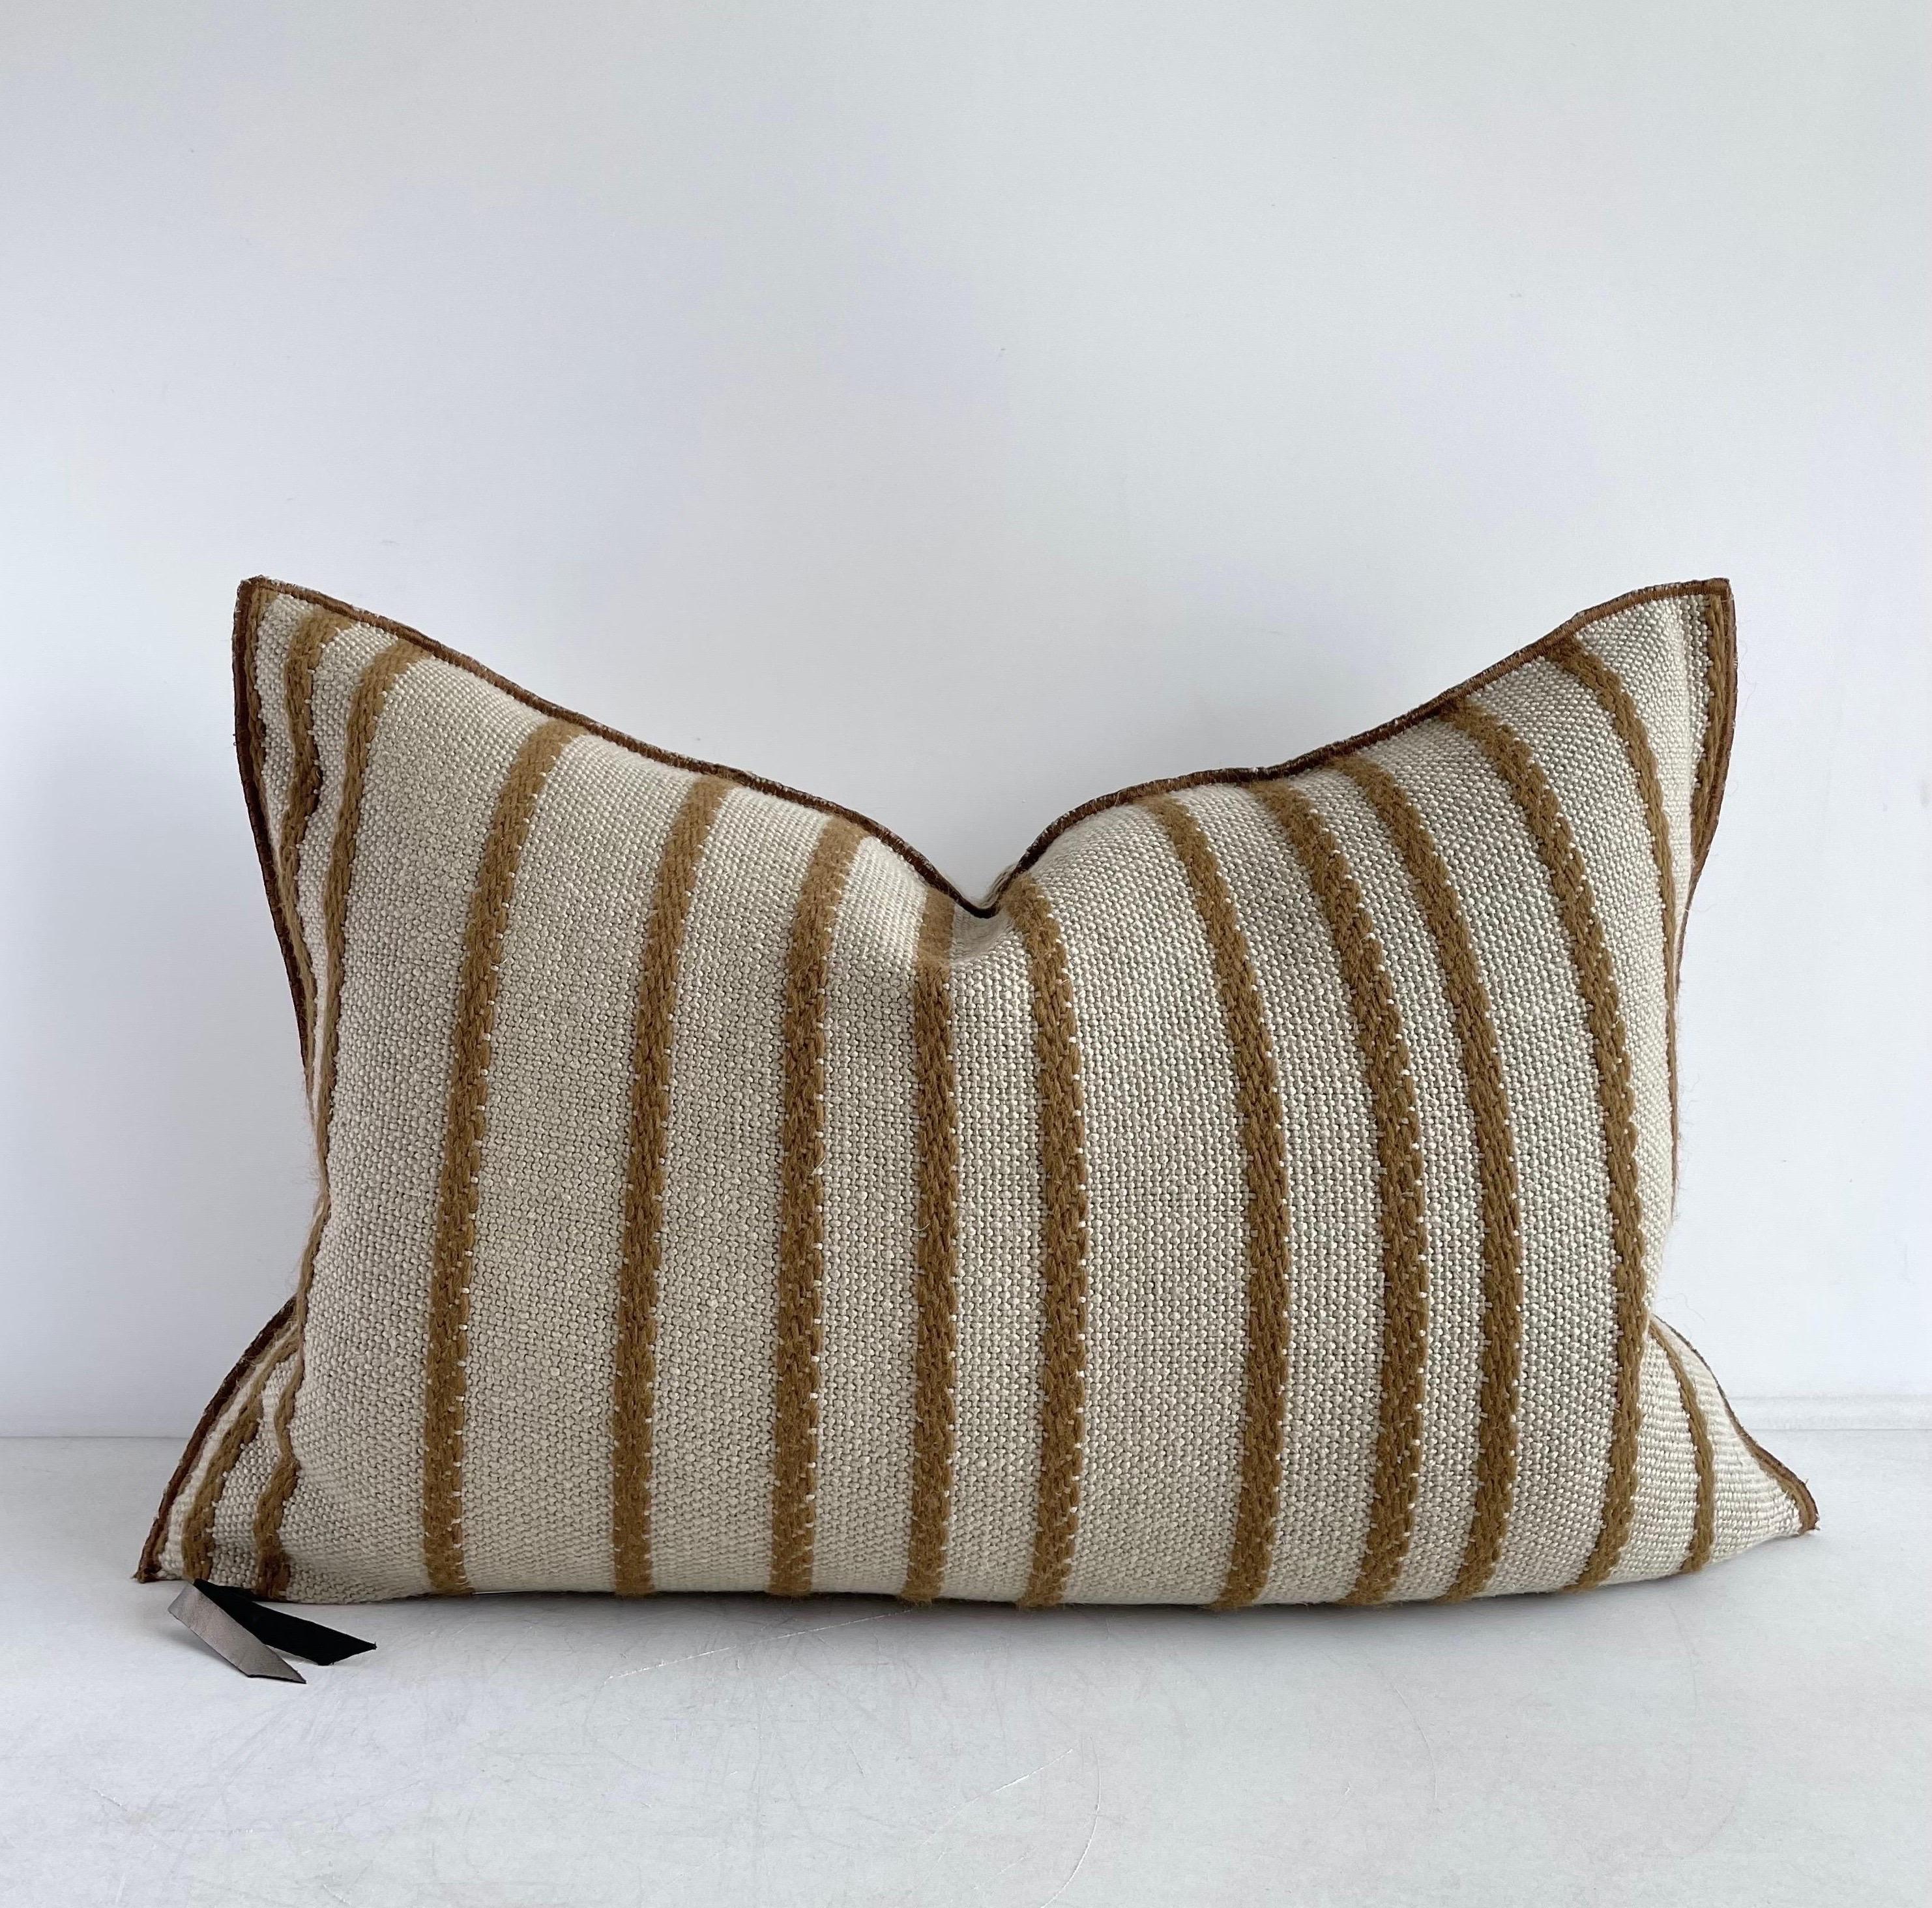 Custom made to order linen pillows from France
Beautiful natural flax heavy weight linen backing with a deep dark mustard gold embroidered stripe pattern, and custom binded edging.
Brass zipper closure, overlocked edges, and down feather insert